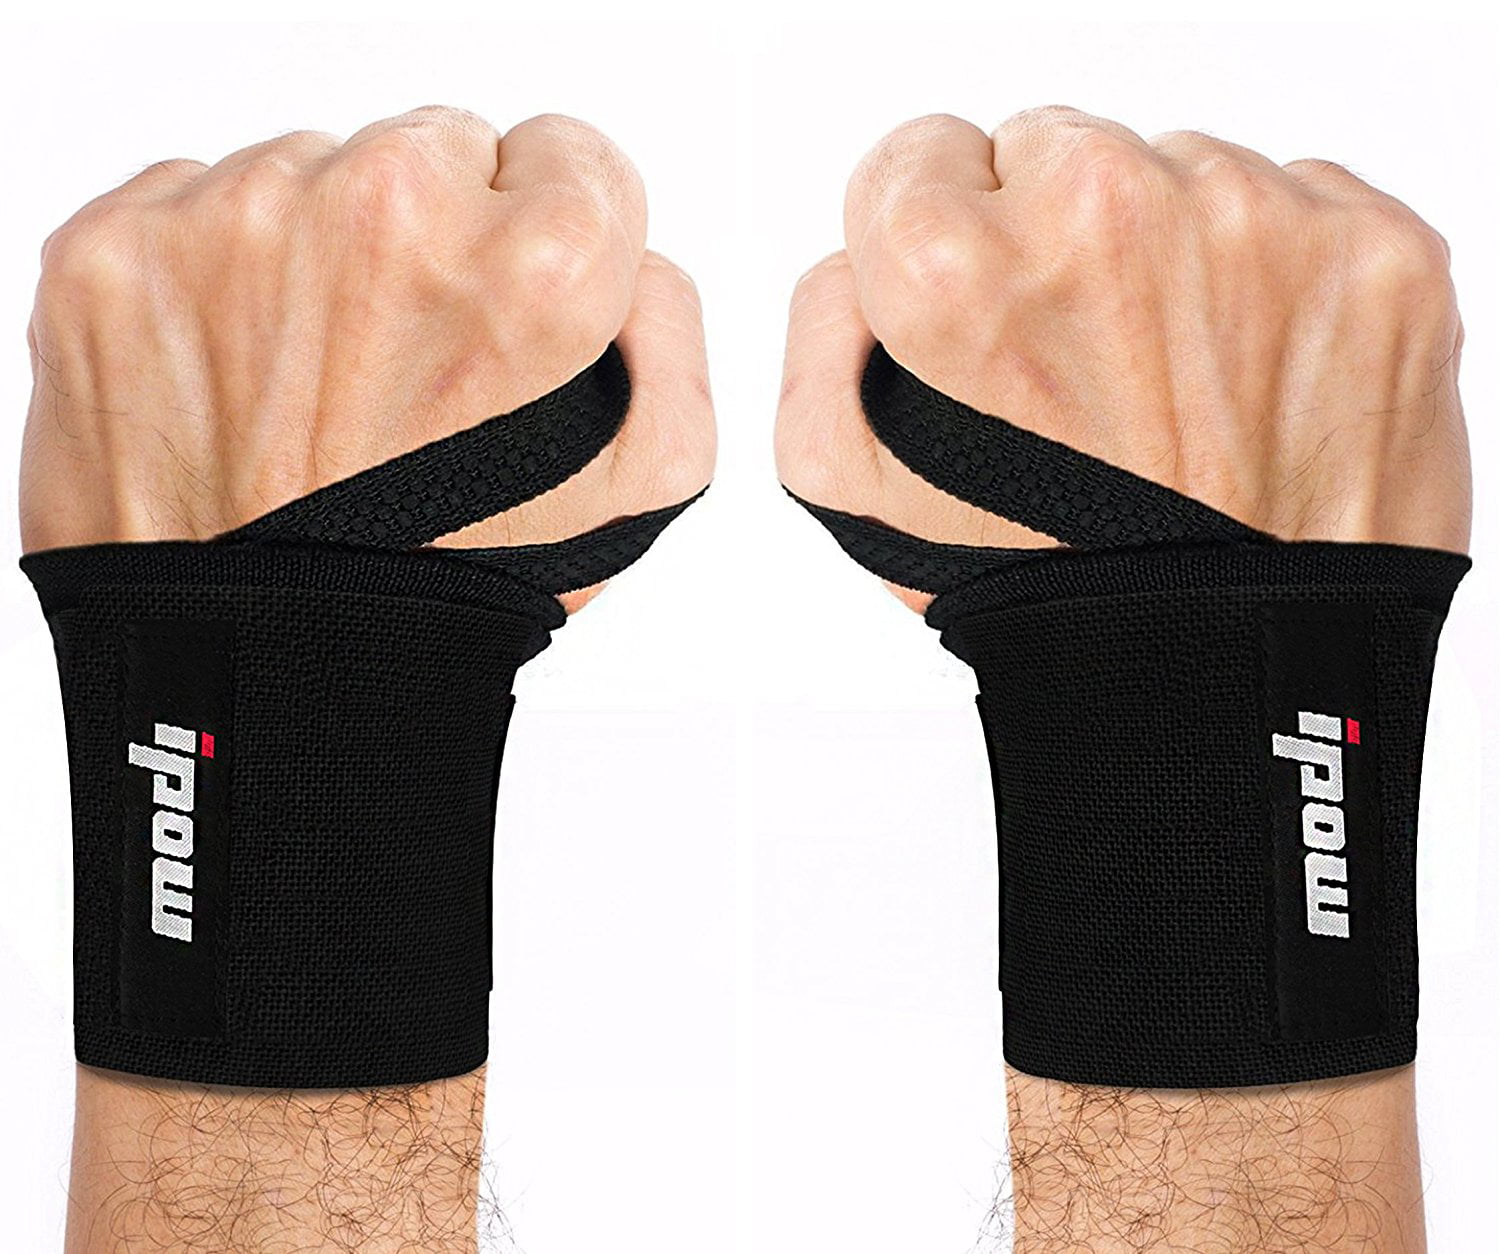 Being fit Weight Lifting Wrist Wraps Men Women Powerlifting Thumb Loop Support Pro 24” Heavy Duty Braces Support Bodybuilding Fitness Muscle Training Gym Elasticated Cotton Fist Straps